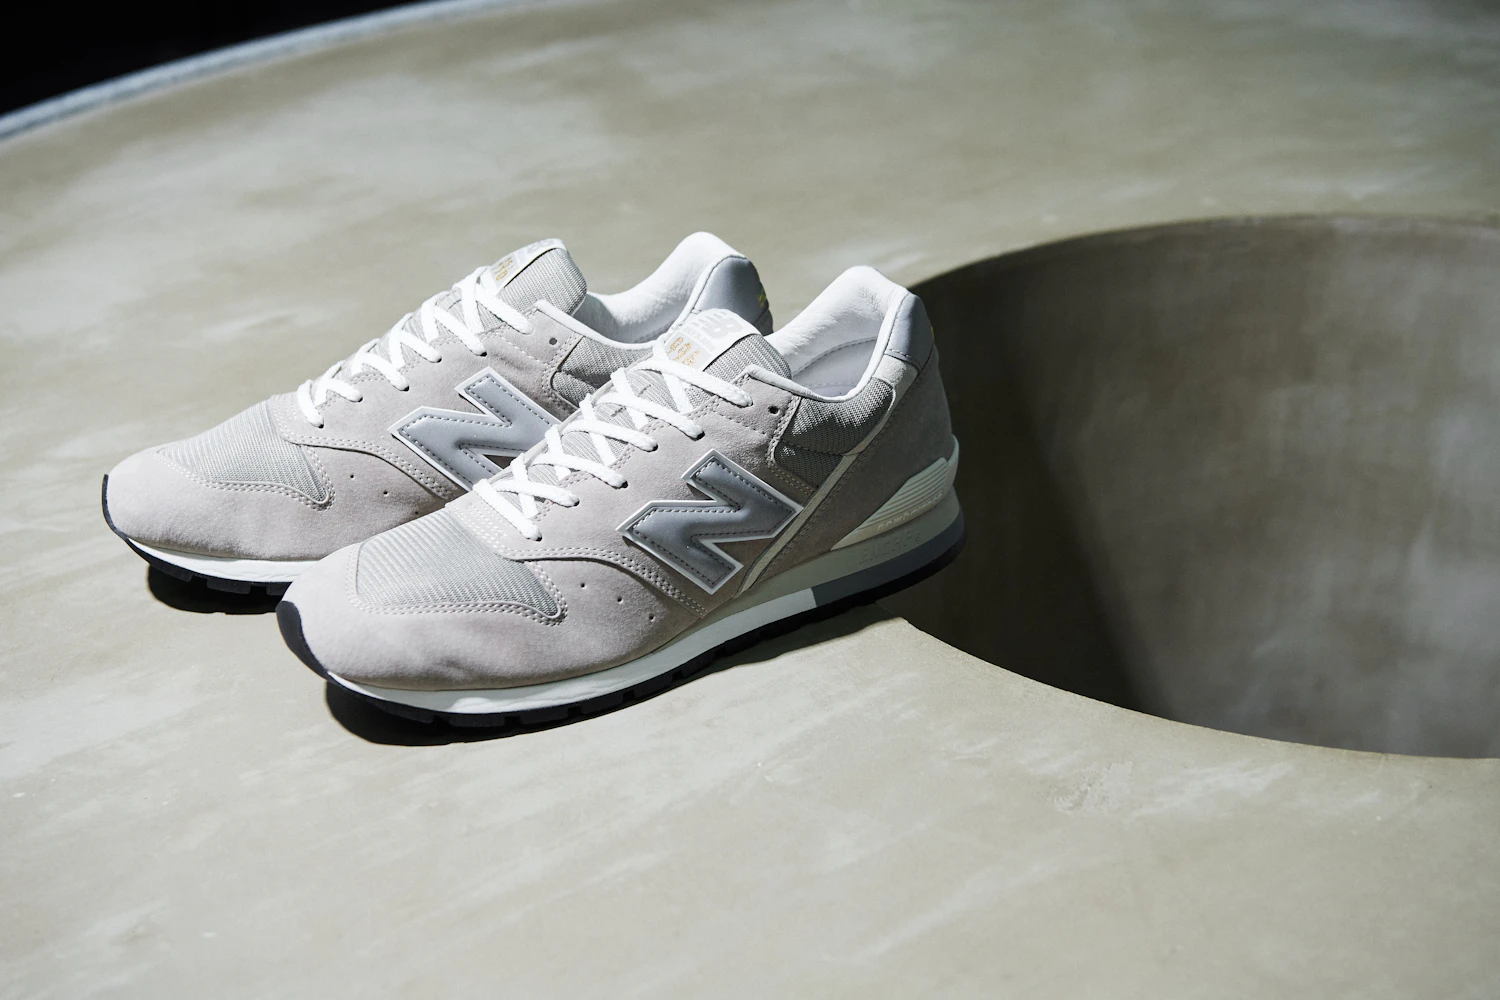 History & Evolution: The New Balance '996' Marks Its 35th Anniversary as a Signature Shoe of the Brand!